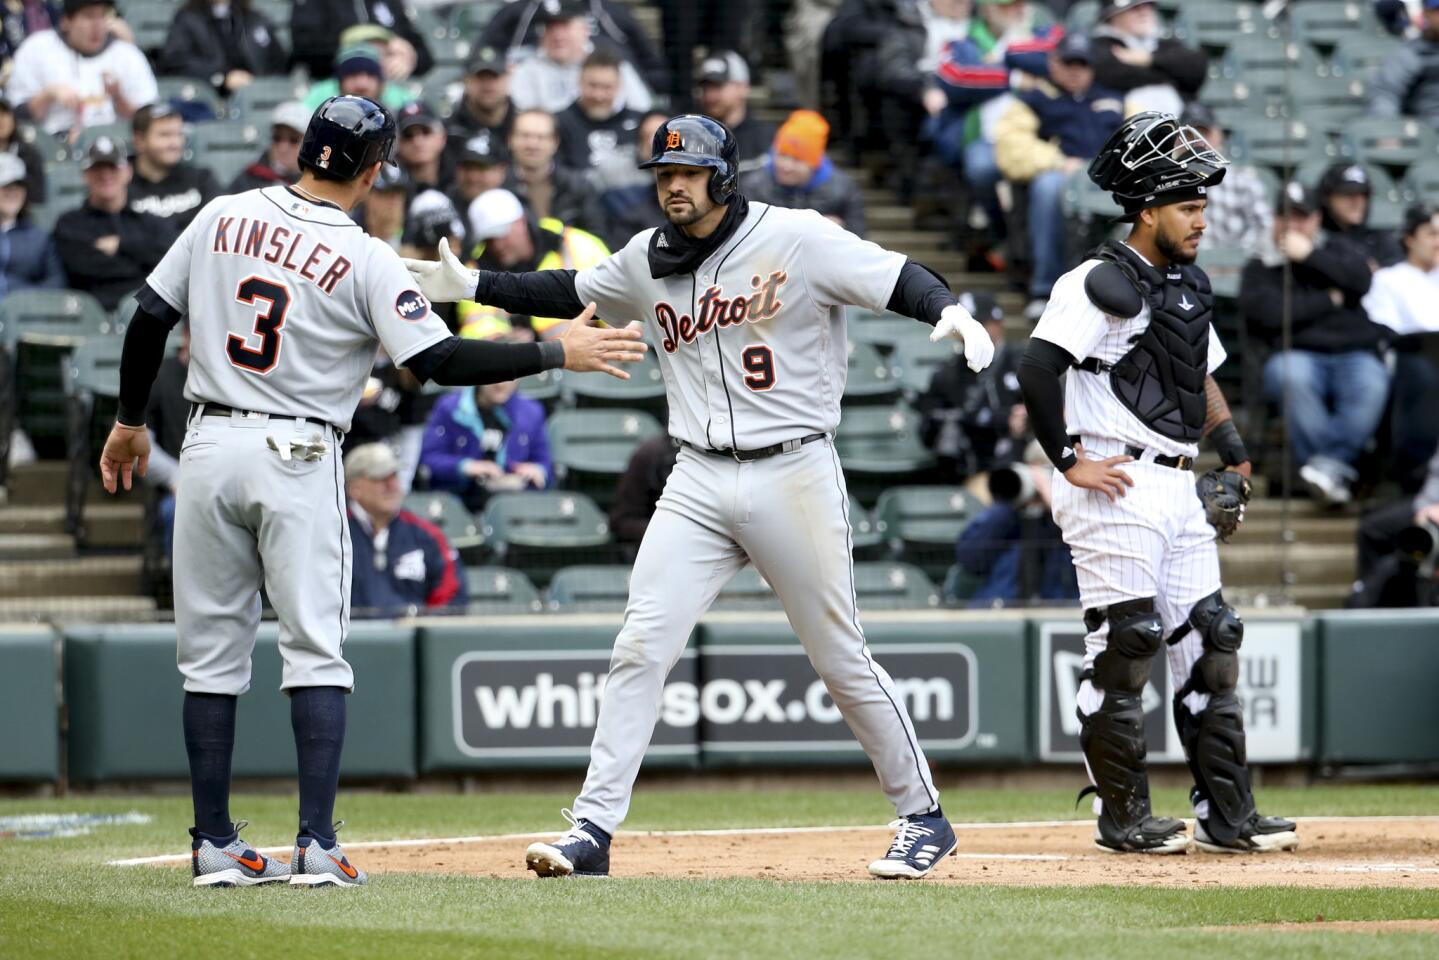 Opening day, take 2: Tigers 6, White Sox 3